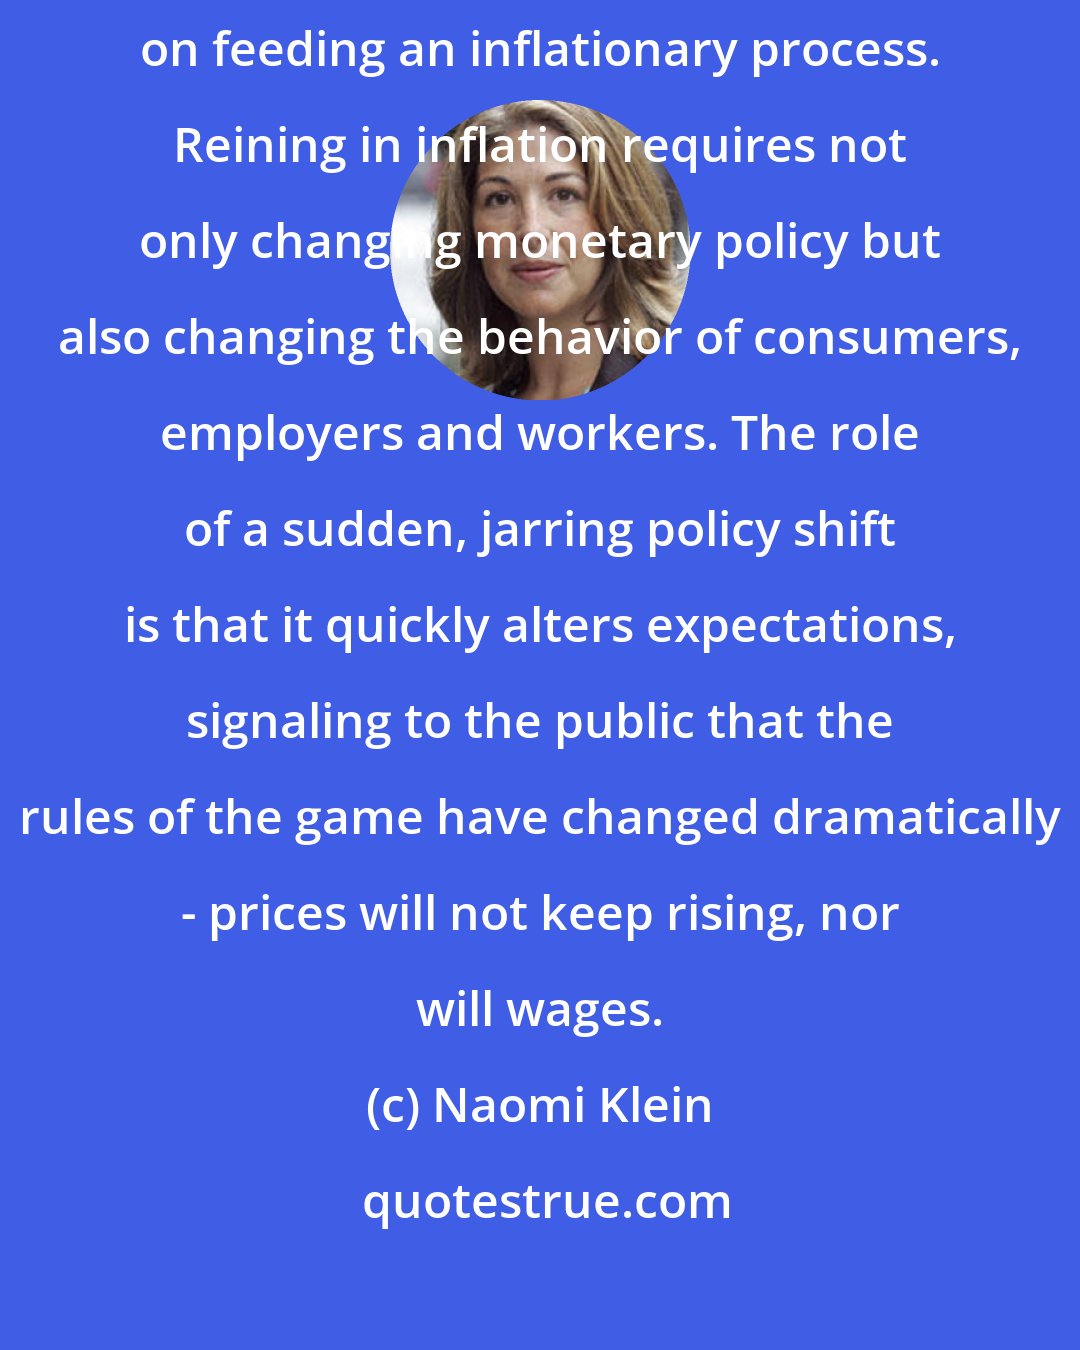 Naomi Klein: The theory of economic shock therapy relies in part on the roleof expectations on feeding an inflationary process. Reining in inflation requires not only changing monetary policy but also changing the behavior of consumers, employers and workers. The role of a sudden, jarring policy shift is that it quickly alters expectations, signaling to the public that the rules of the game have changed dramatically - prices will not keep rising, nor will wages.